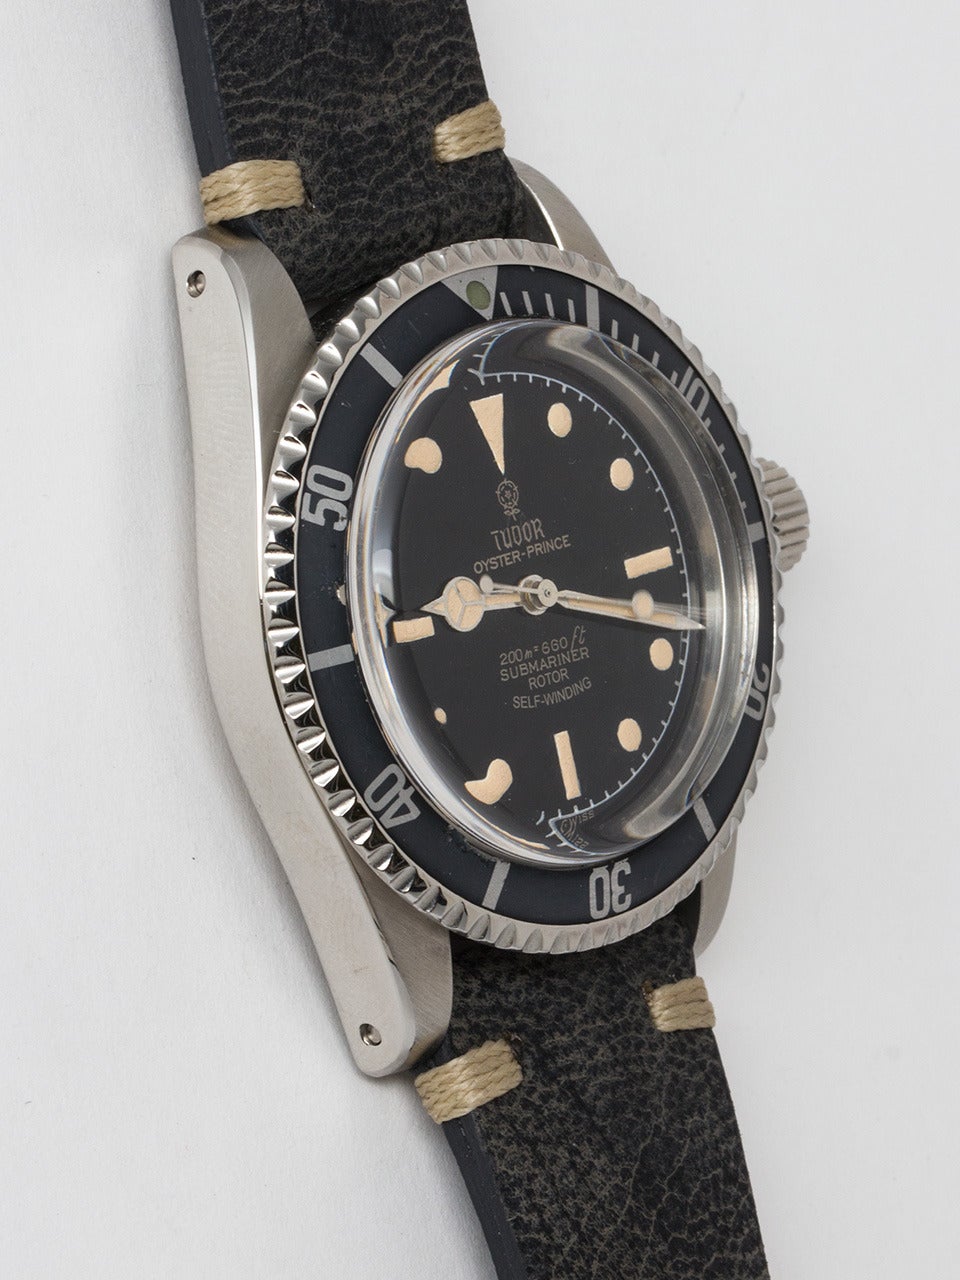 Tudor Stainless Steel Submariner Wristwatch ref 7928 serial #379,XXX circa 1962. Measuring 39.5mm diameter case with rotating elapsed time bezel and pointy crown guards. With beautifully refinished glossy black minute track dial with patina'd